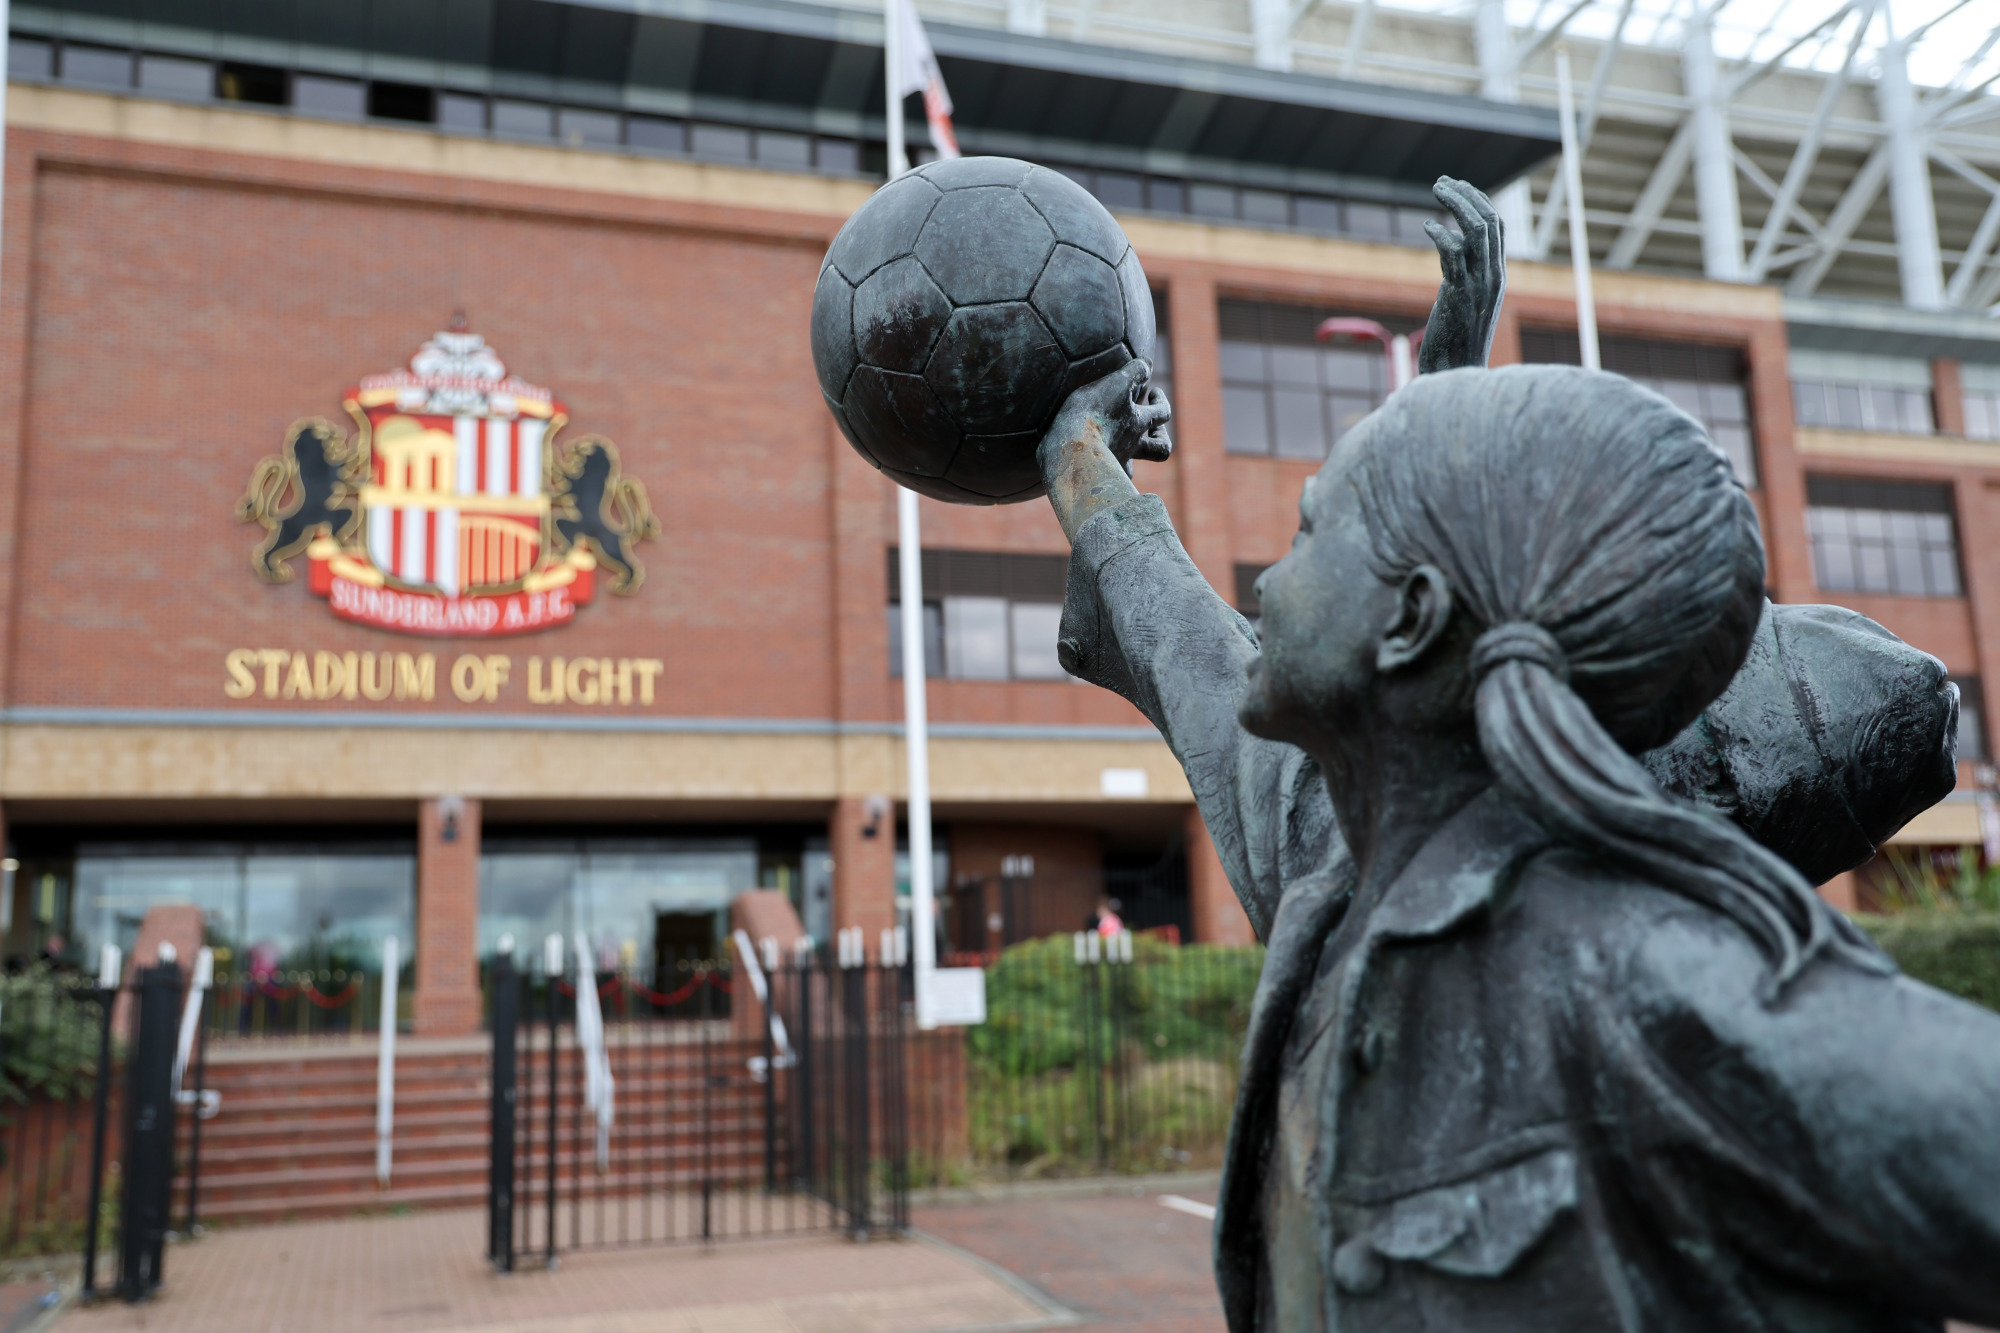 How Smart Data is Helping Sunderland A.F.C Reduce Energy Usage 